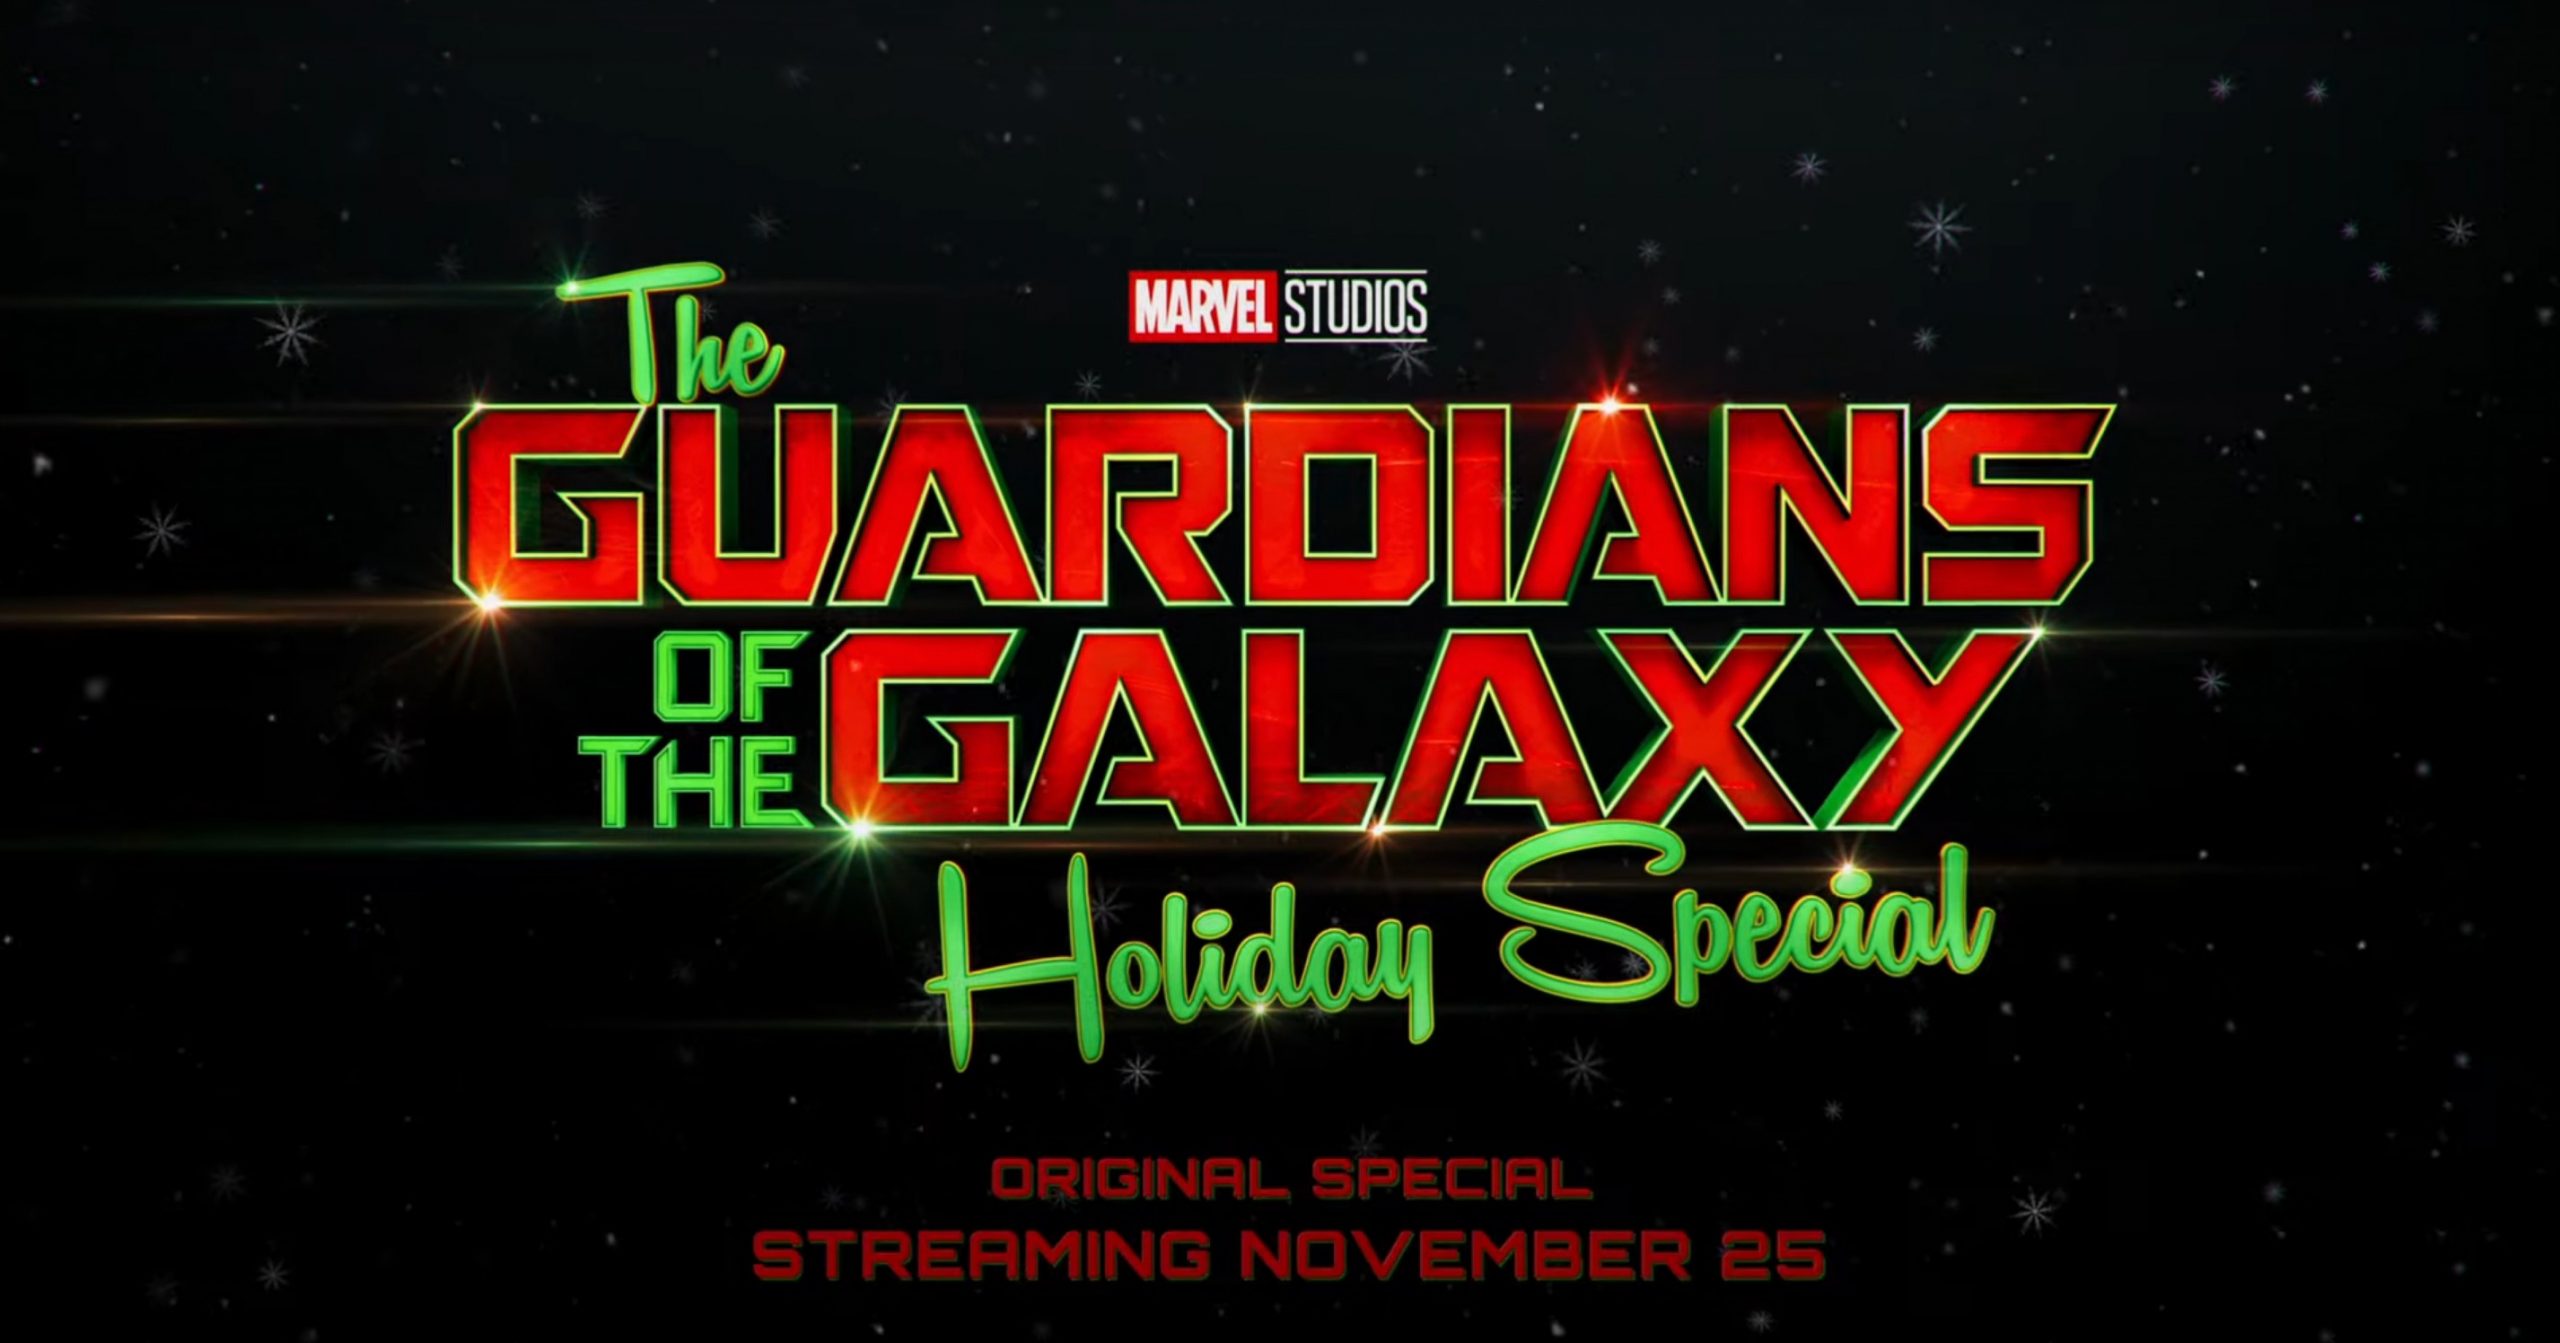 Disney+ releases trailer for 'The Guardians of the Galaxy Holiday Special'